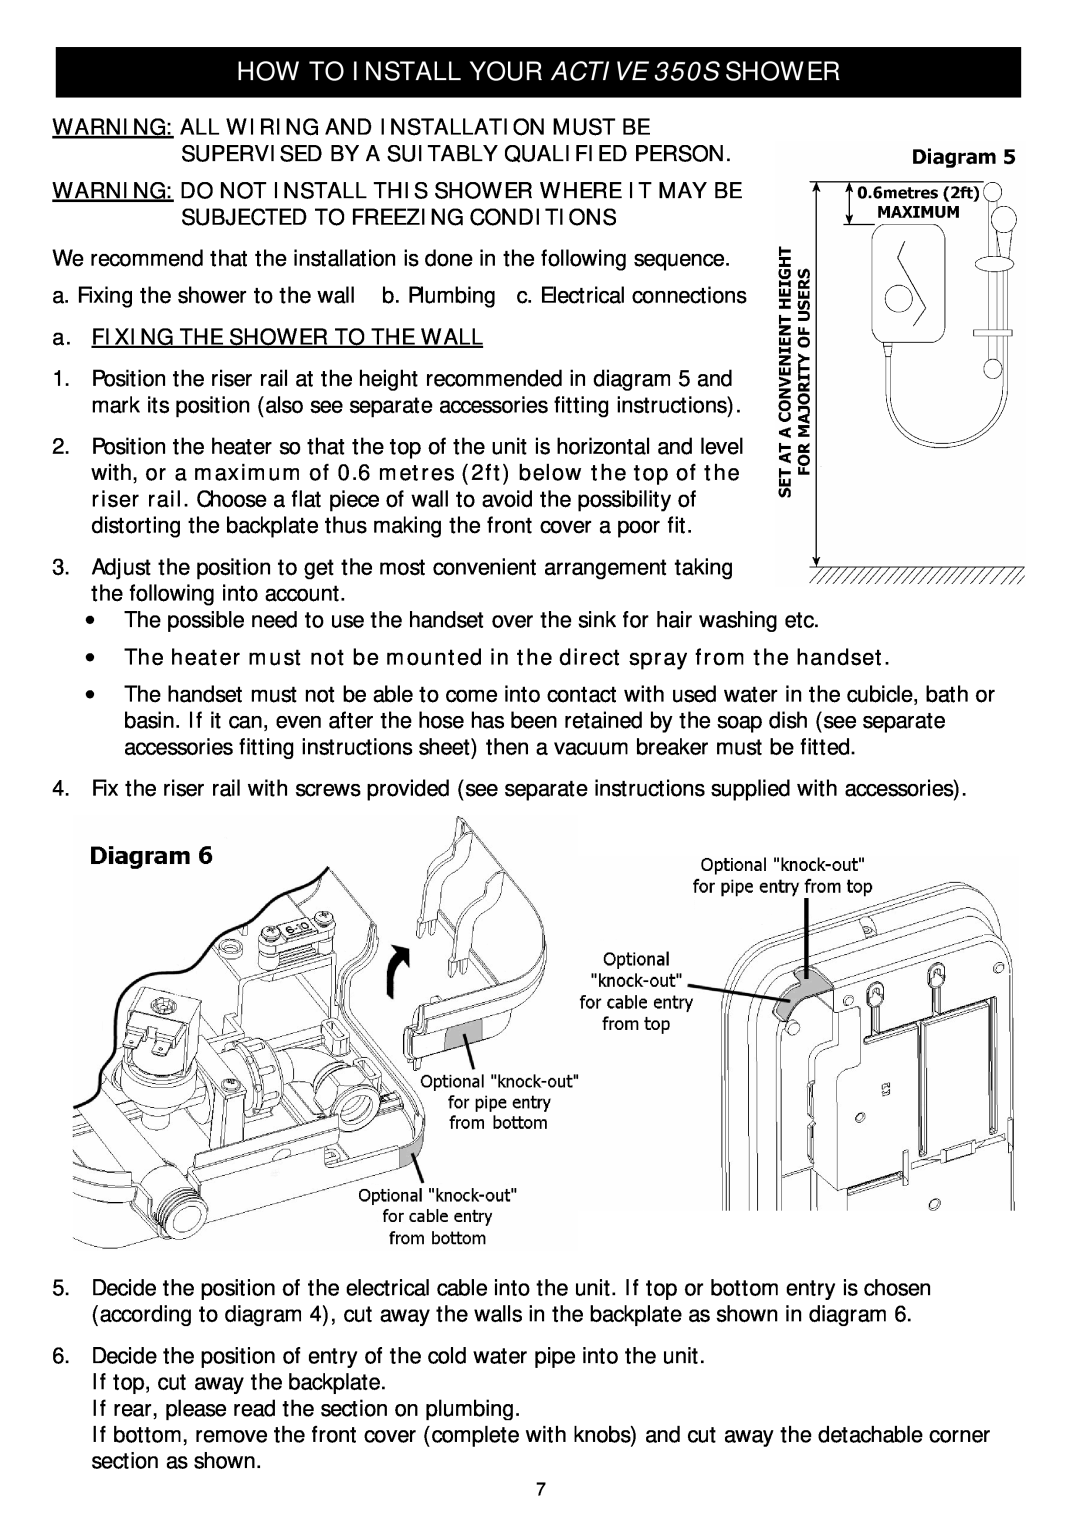 Redring manual HOW TO INSTALL YOUR ACTIVE 350S SHOWER, Warning All Wiring And Installation Must Be 